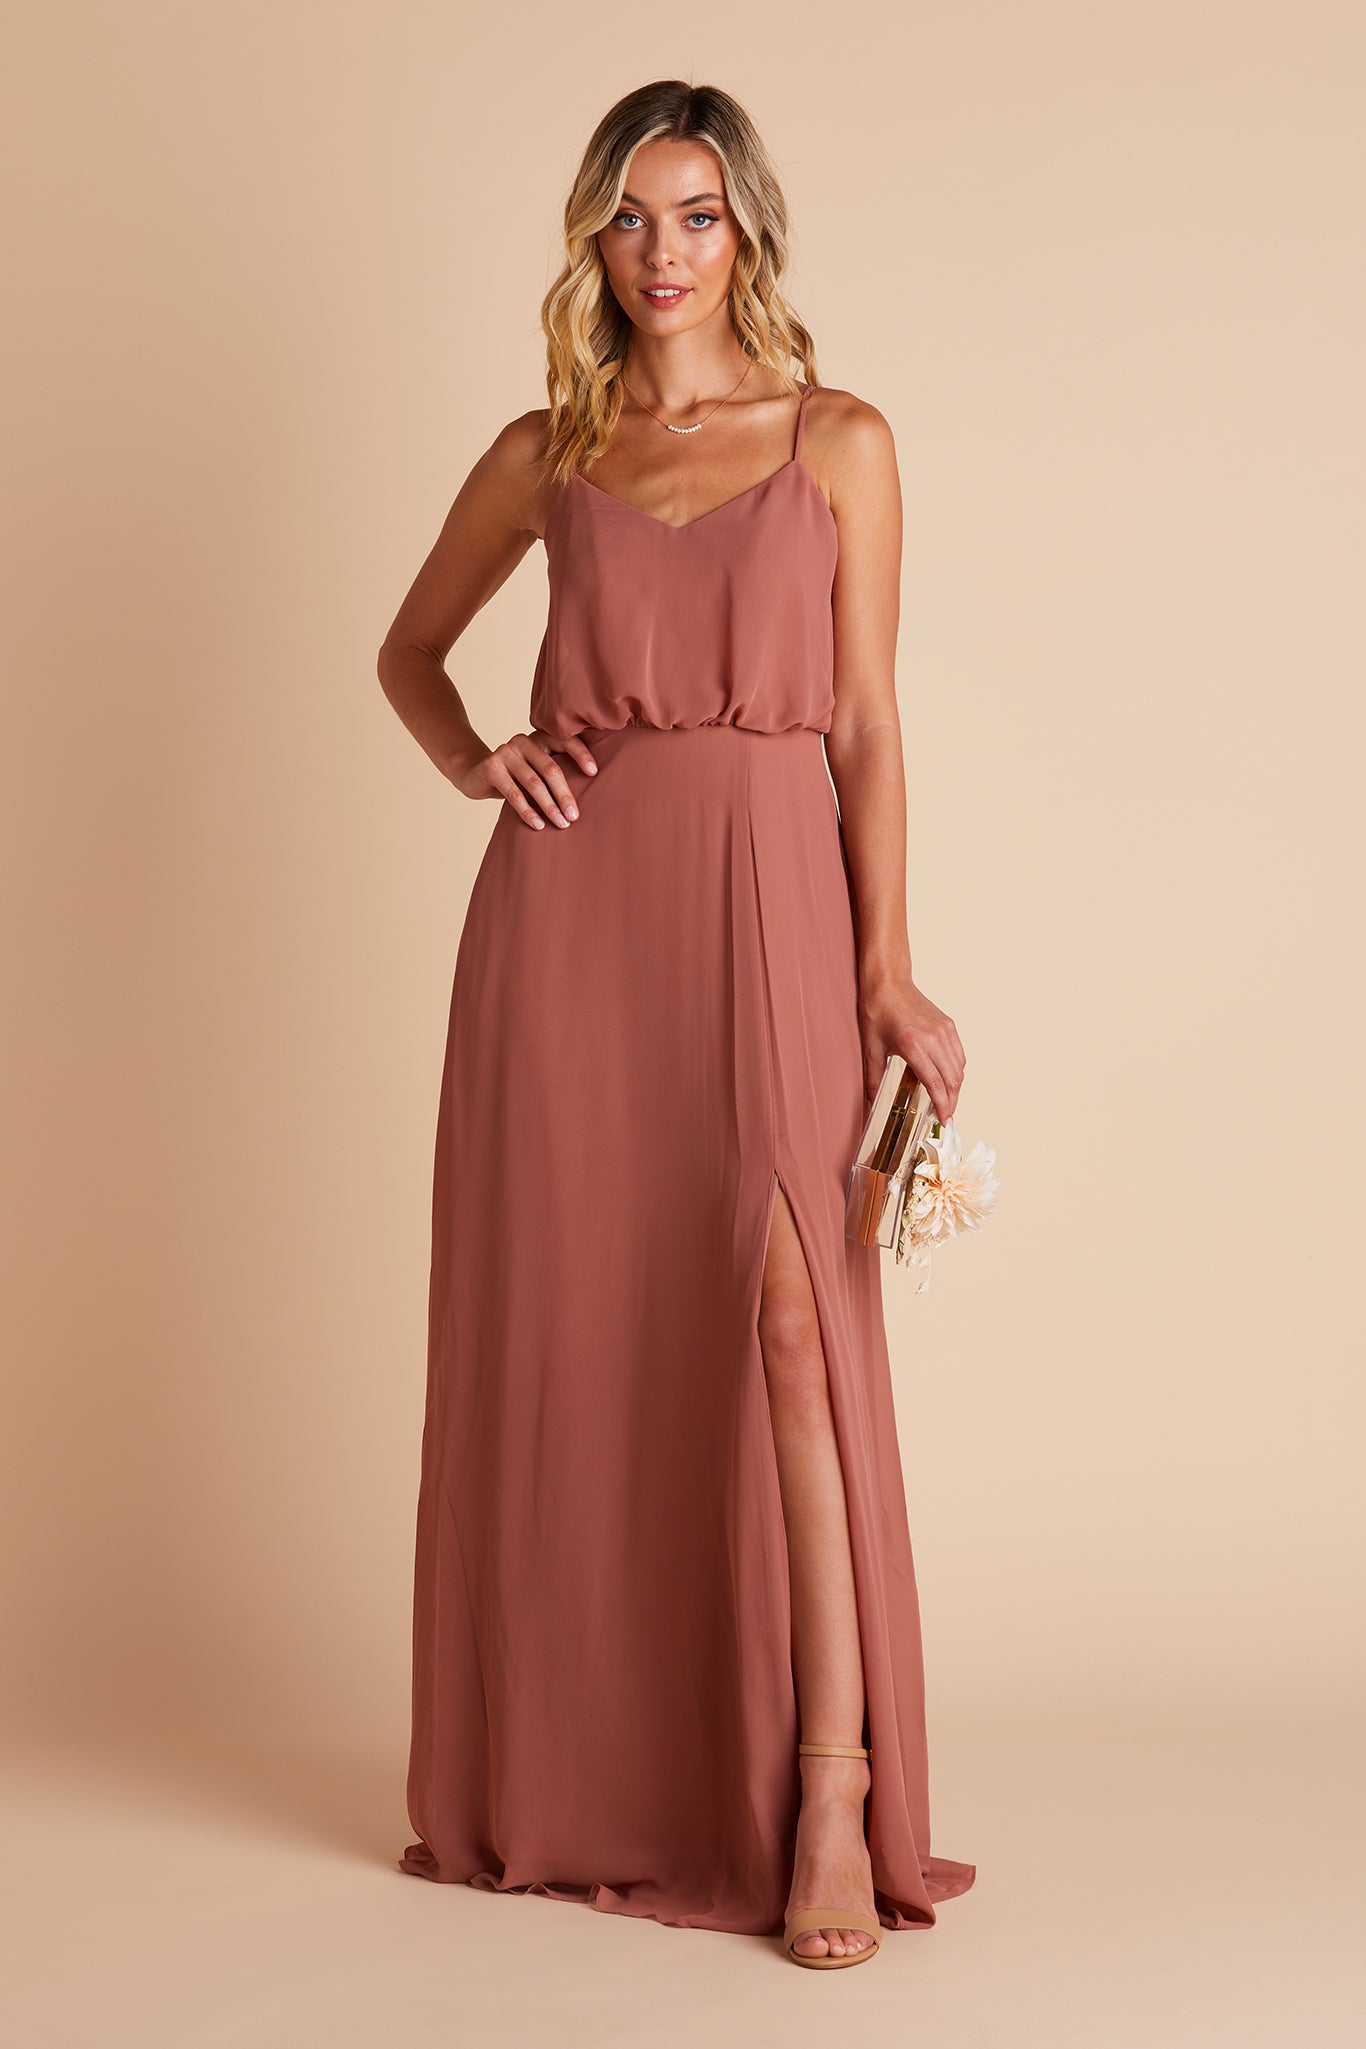 Gwennie bridesmaid dress with slit in desert rose chiffon by Birdy Grey, front view